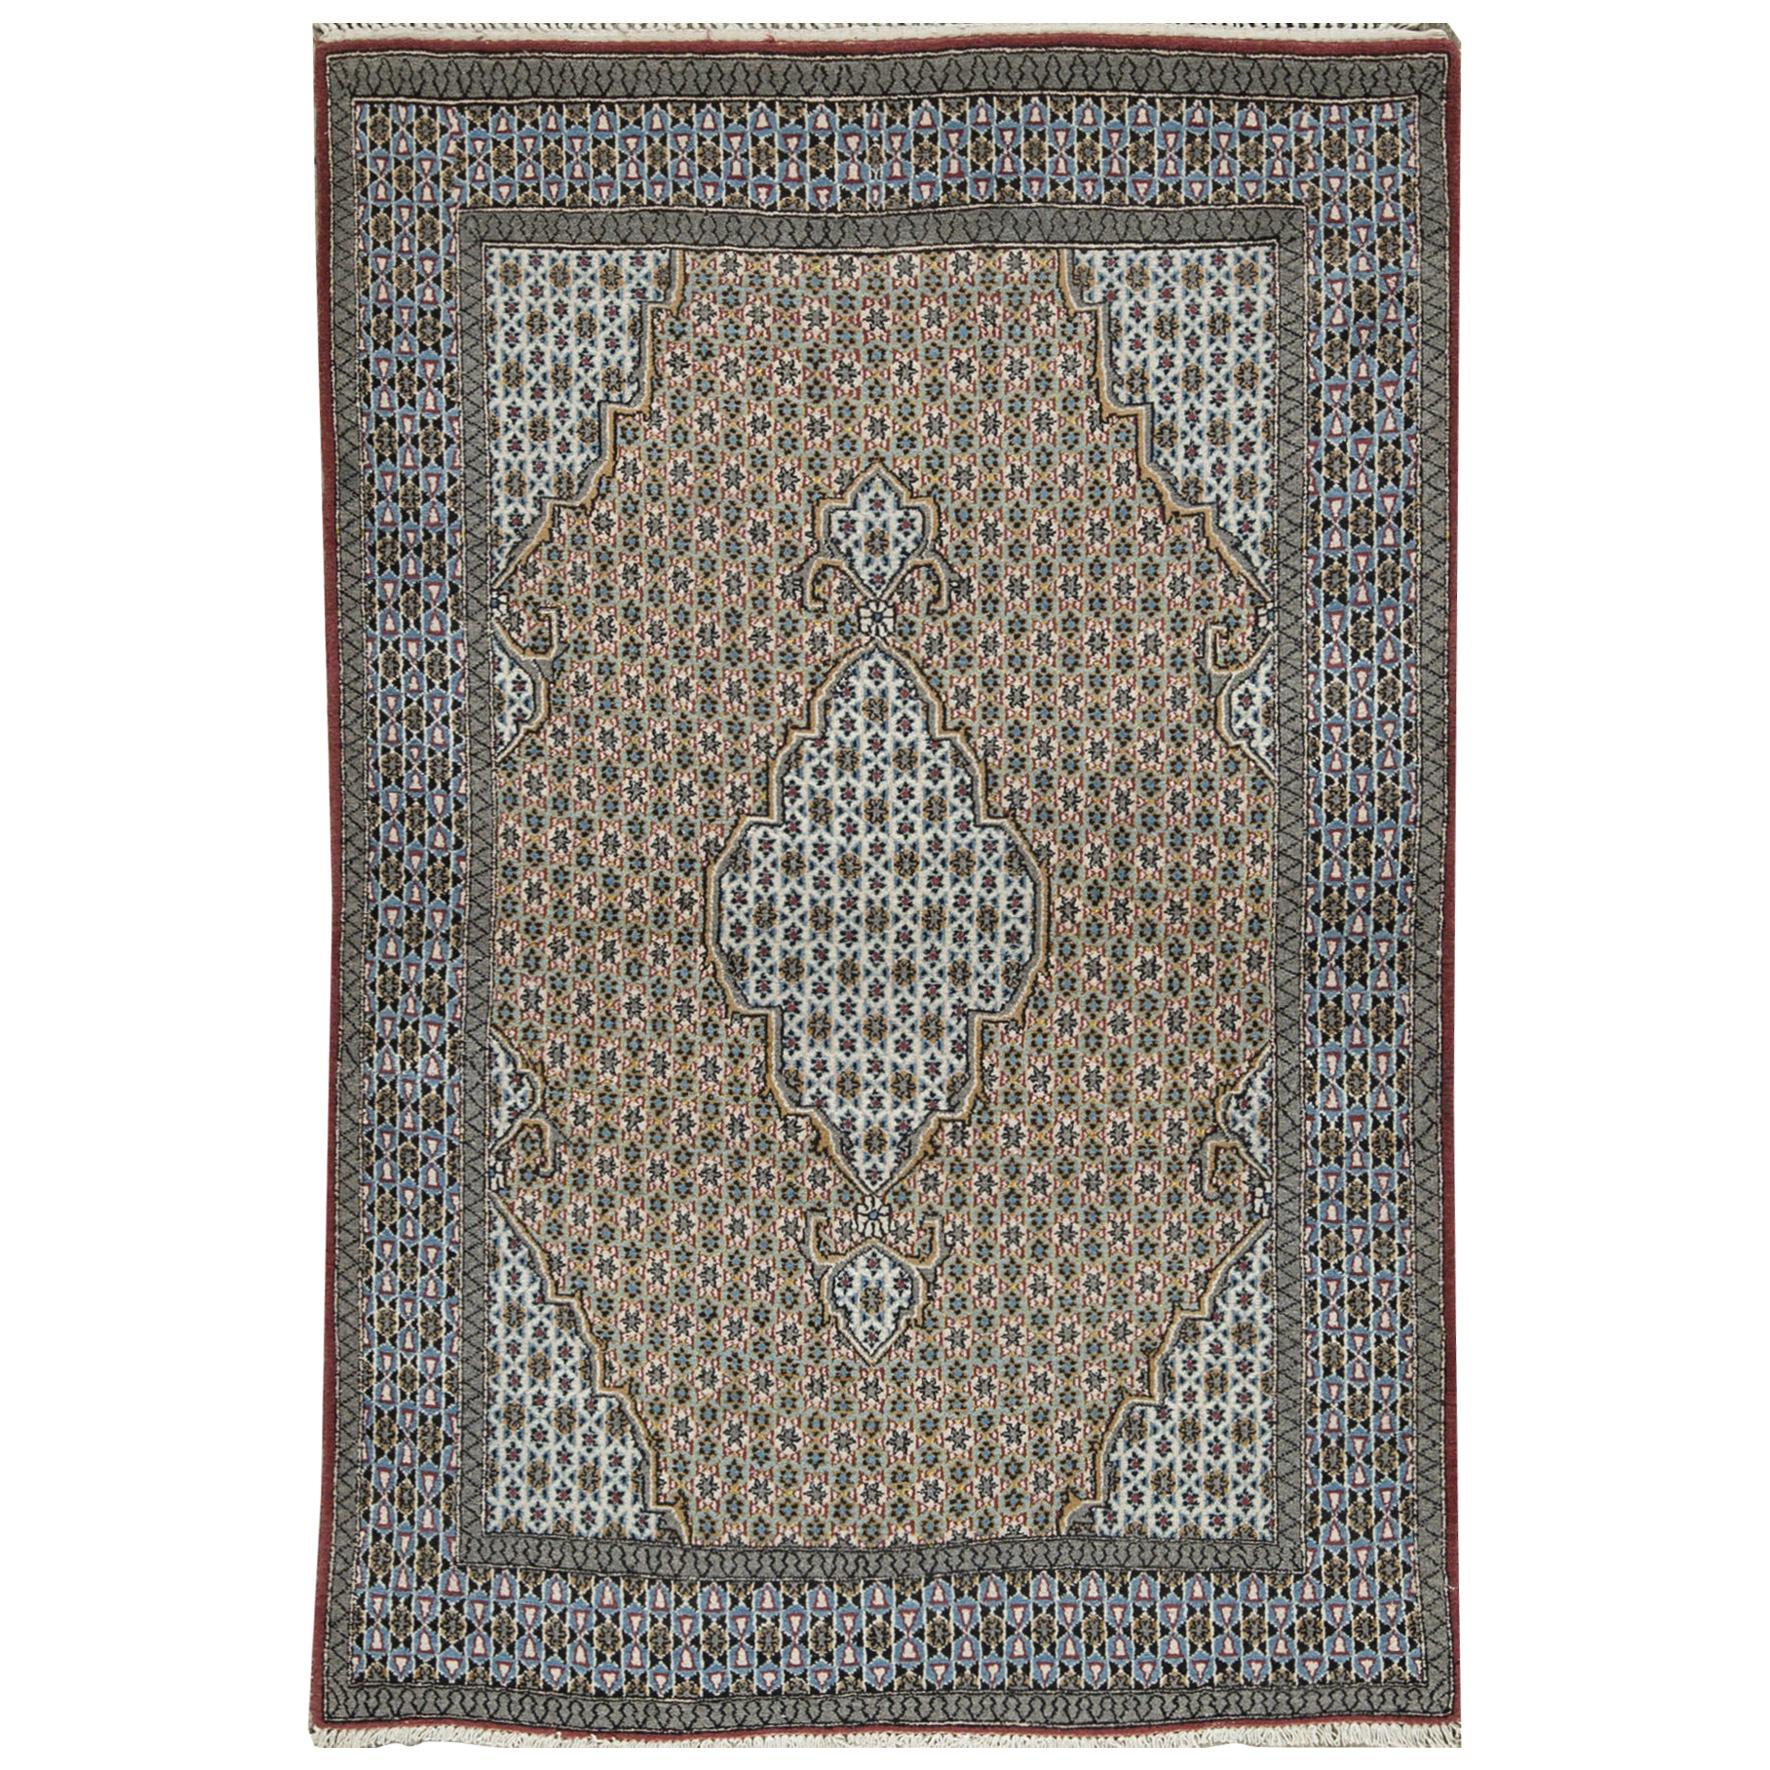 One of a Kind Traditional Handwoven Wool Area Rug 4’9" x 9'.  